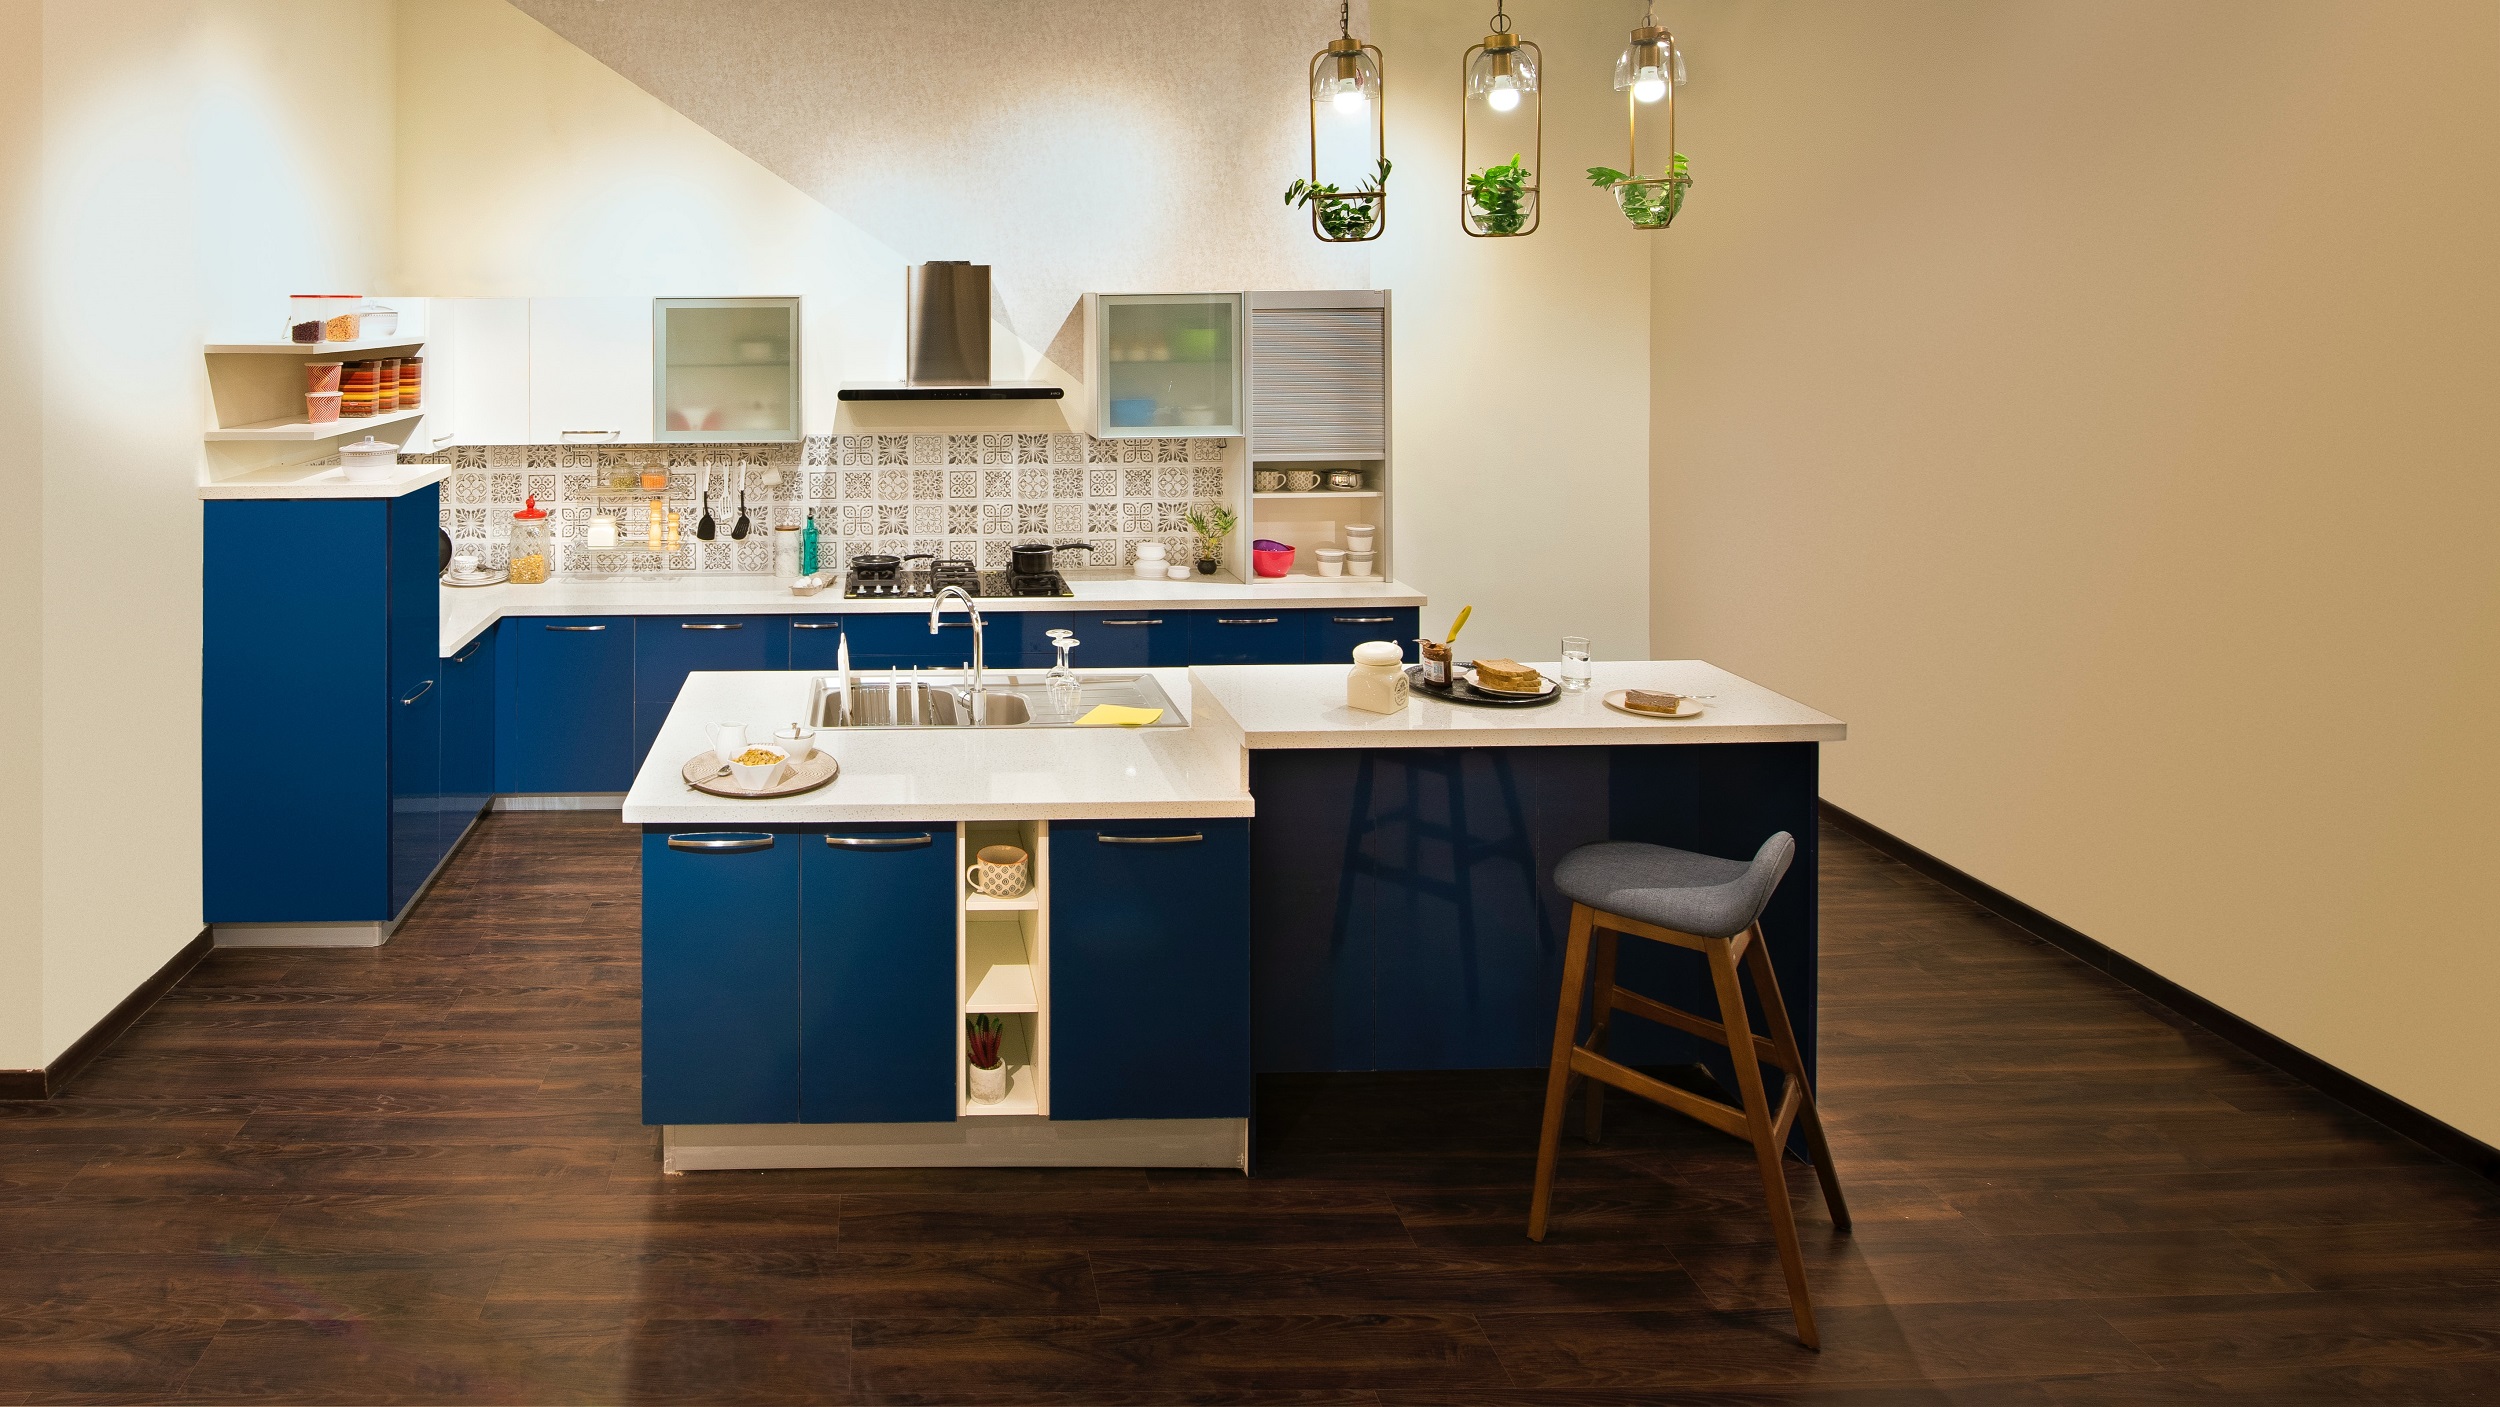 Important guidelines before shop the kitchen cabinets: